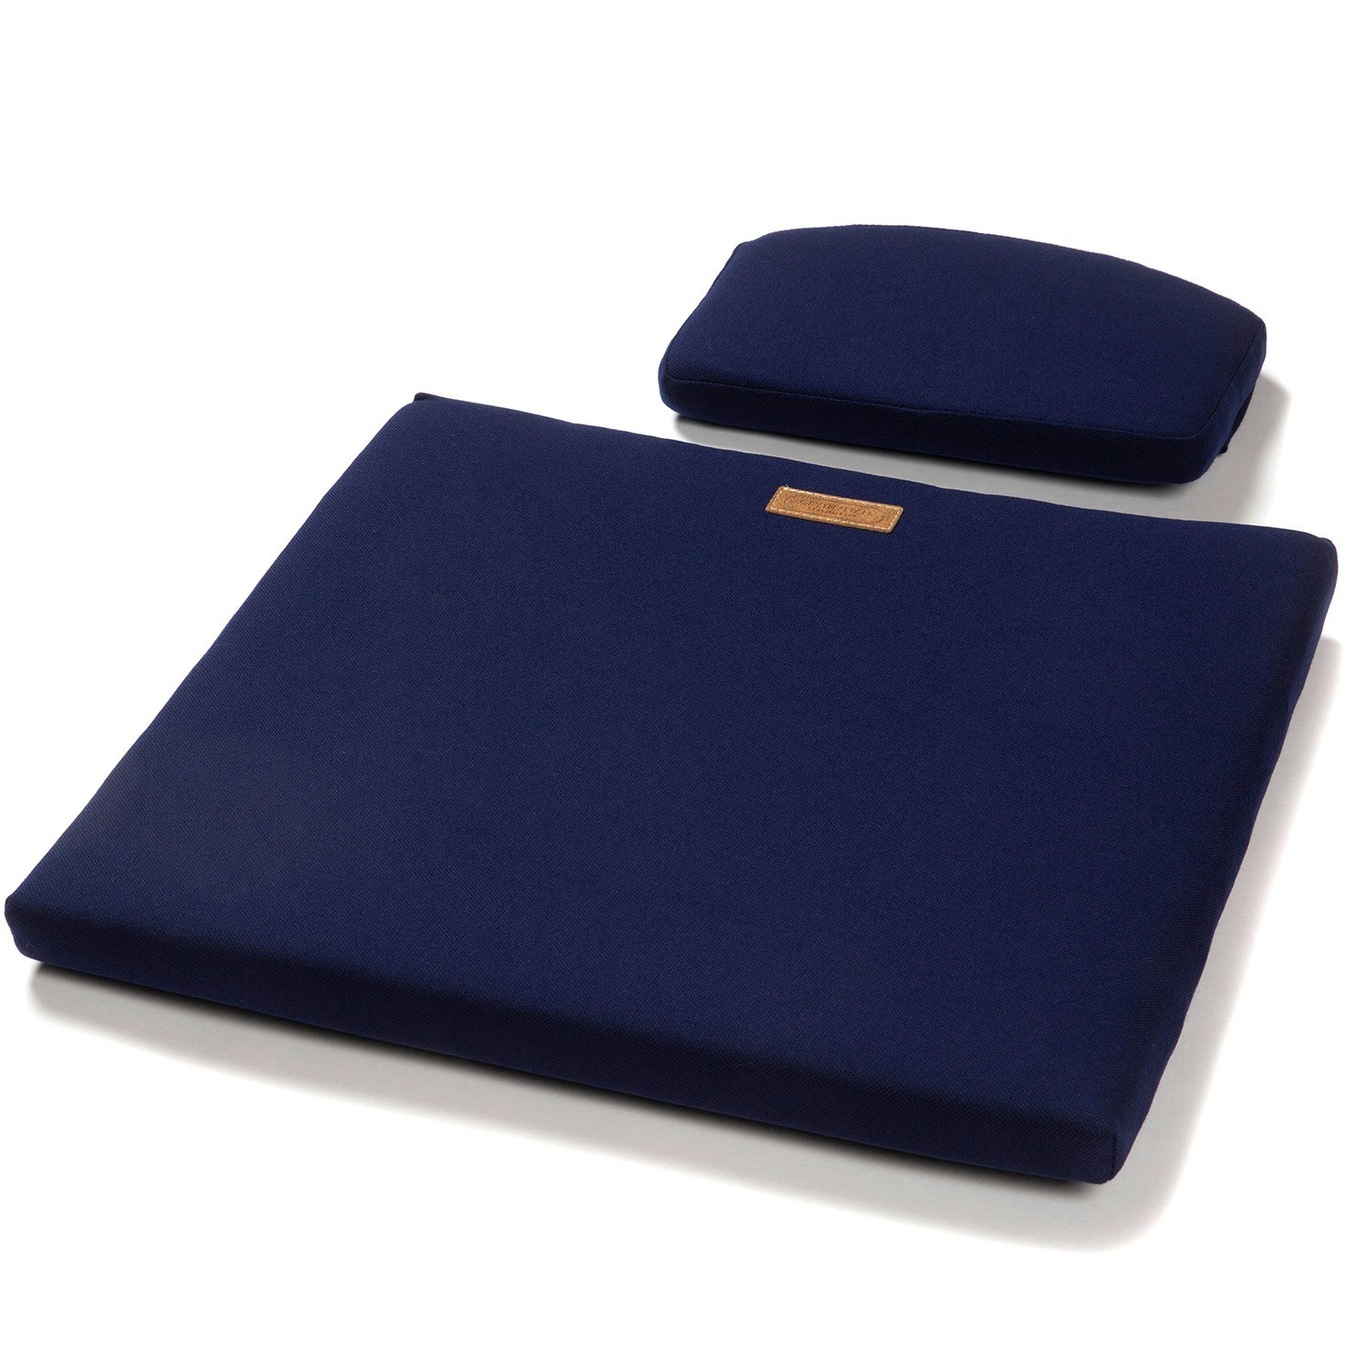 A3 Seat Cushion For Lounge Chair, Blue